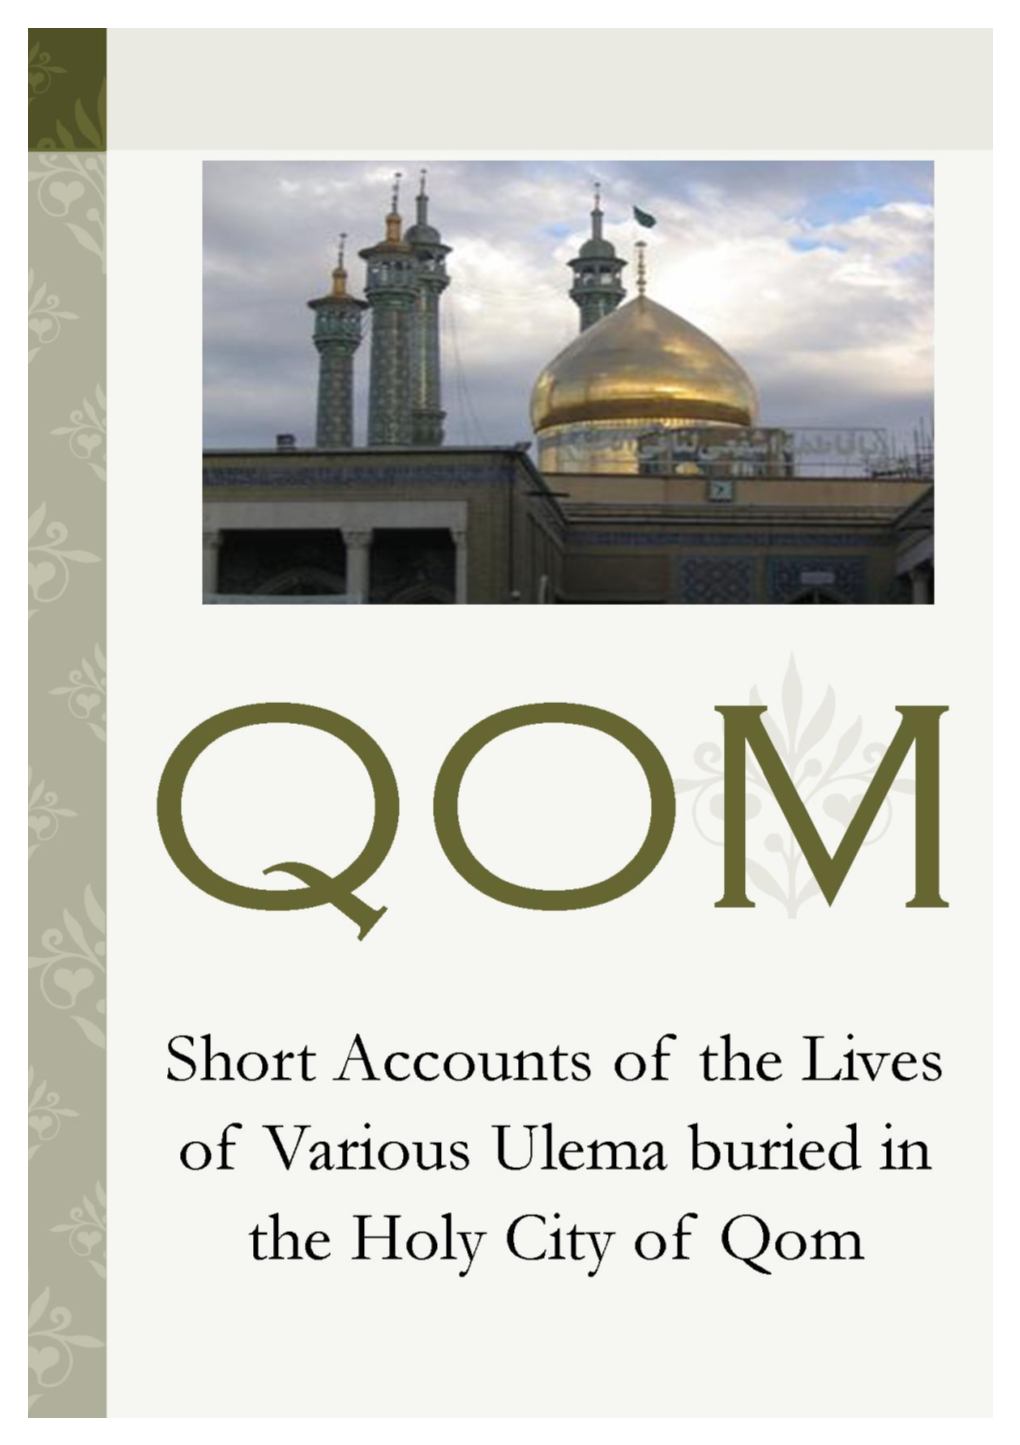 Lives of the Ulemas Buried in the Holy City Of